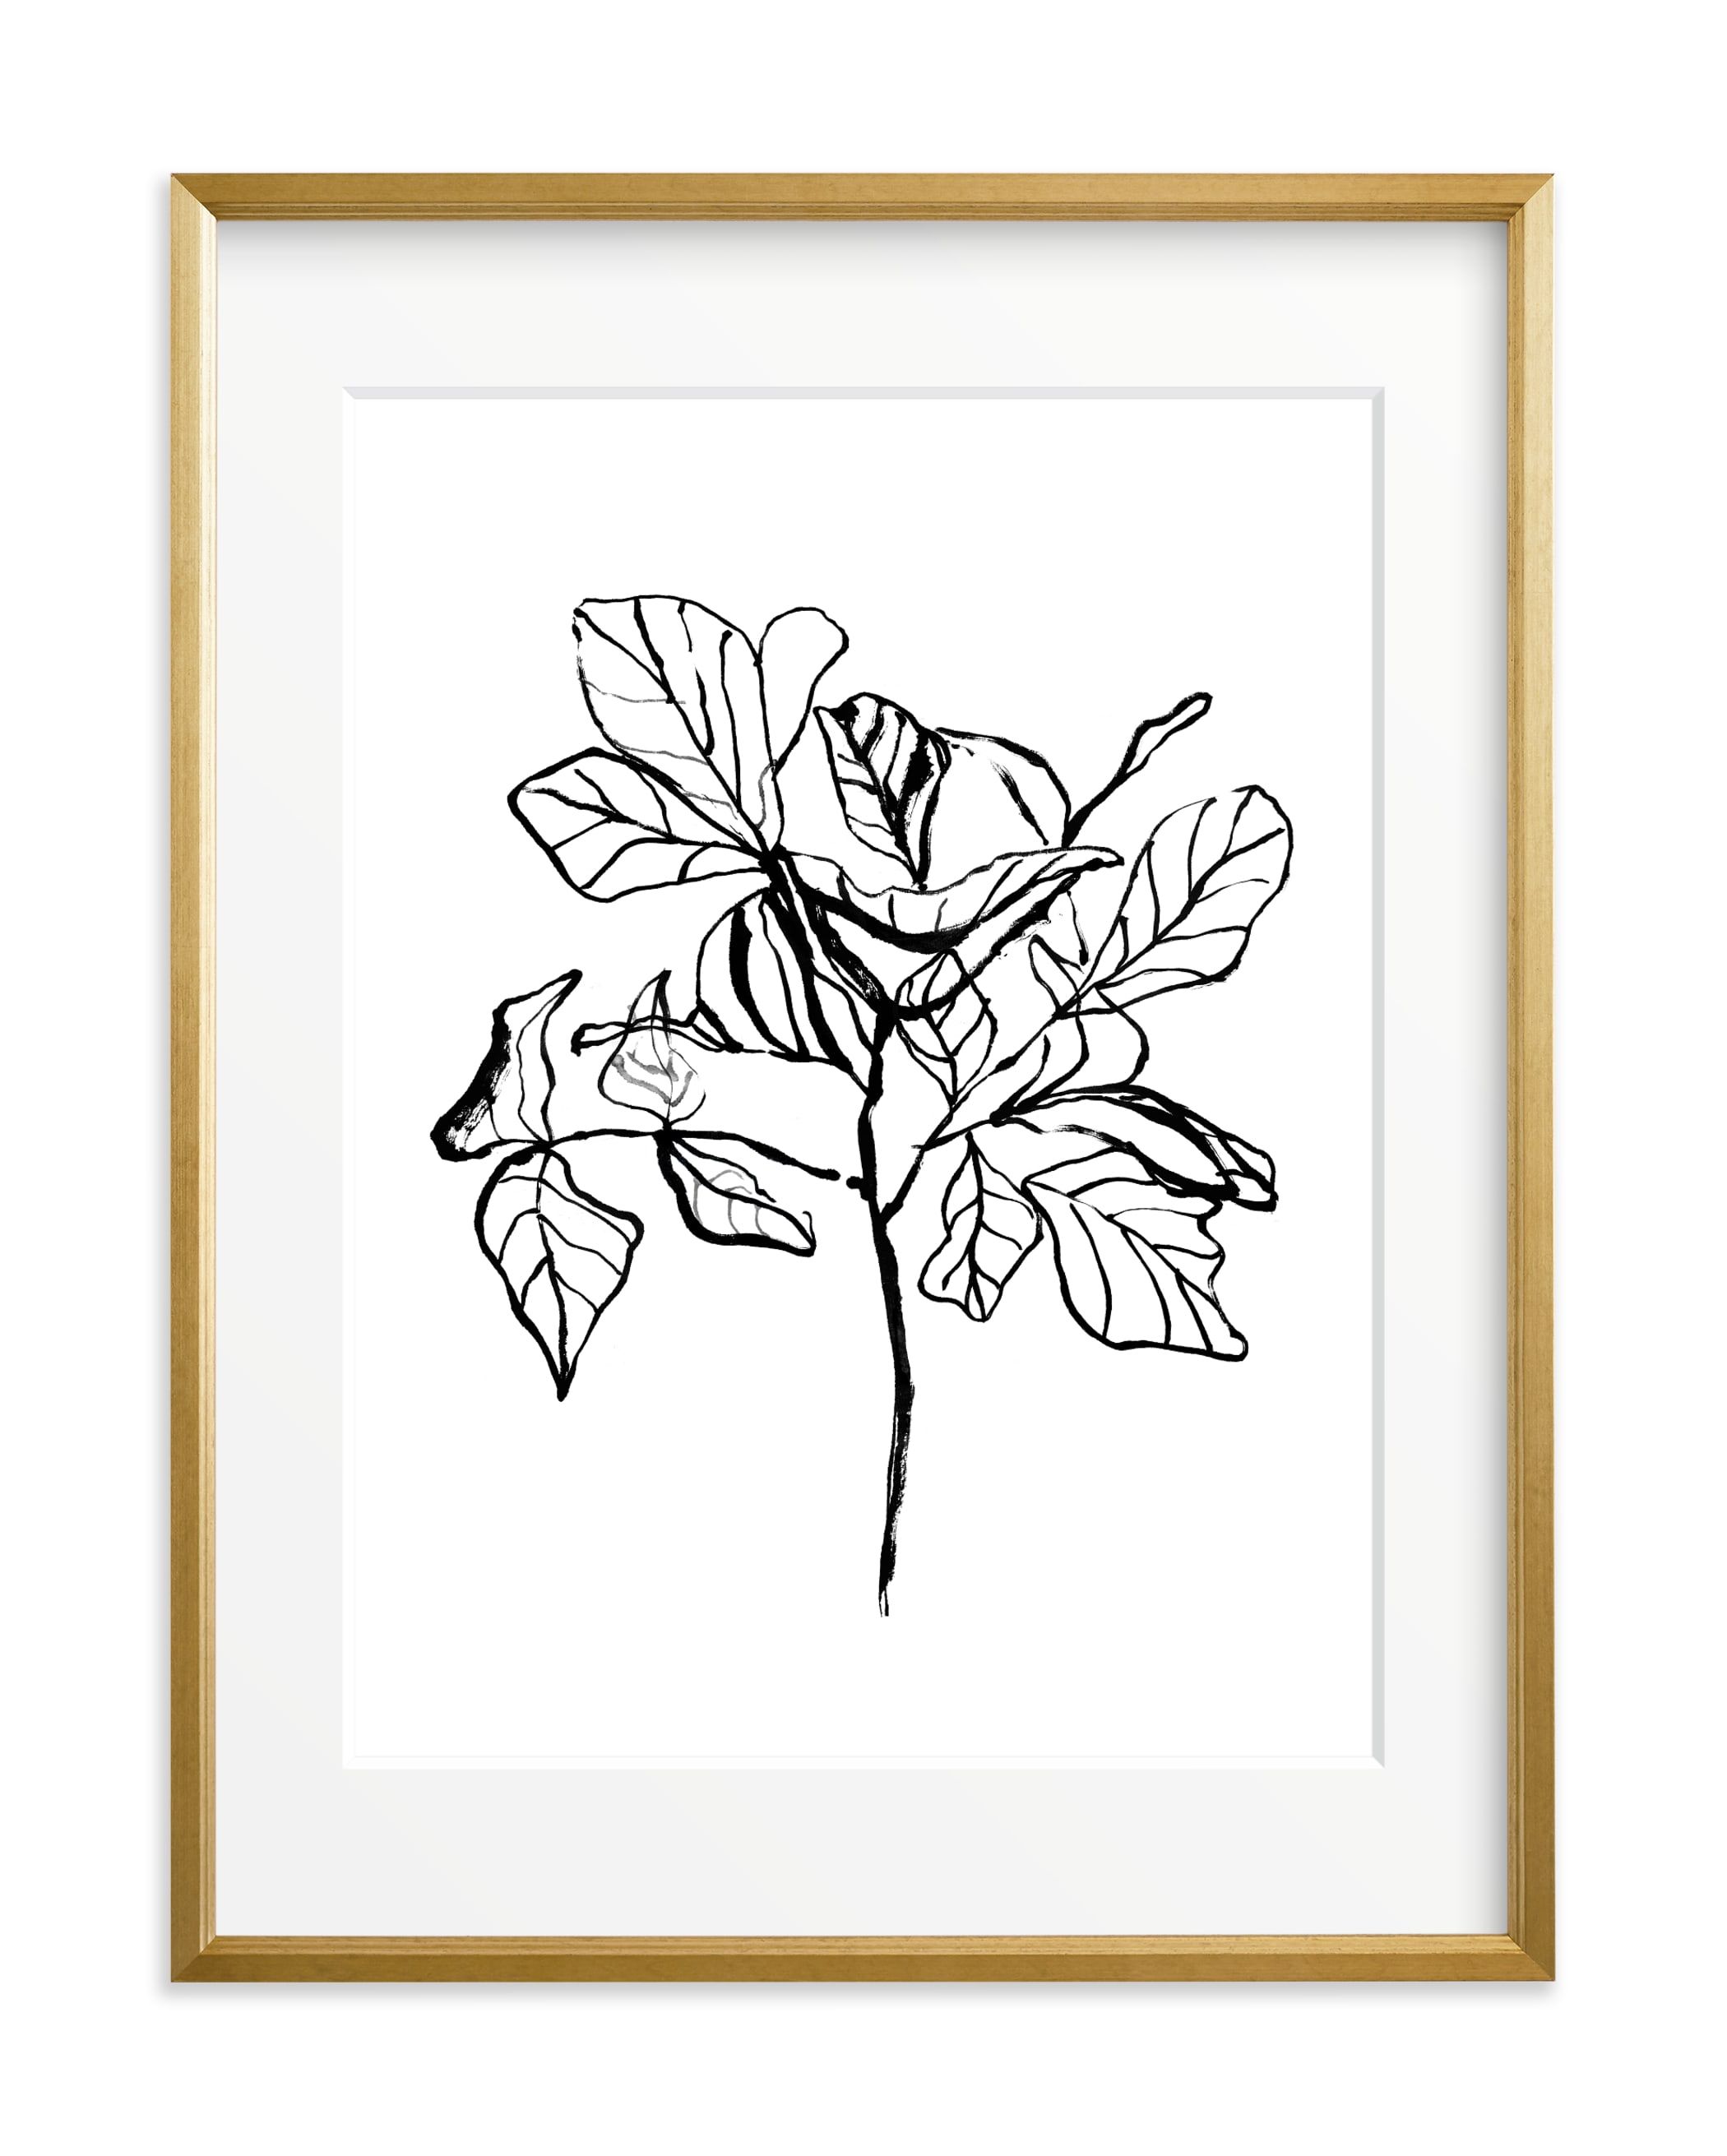 "Fiddle-leaf fig tree 2" - Limited Edition Art Print by Cass Loh. | Minted